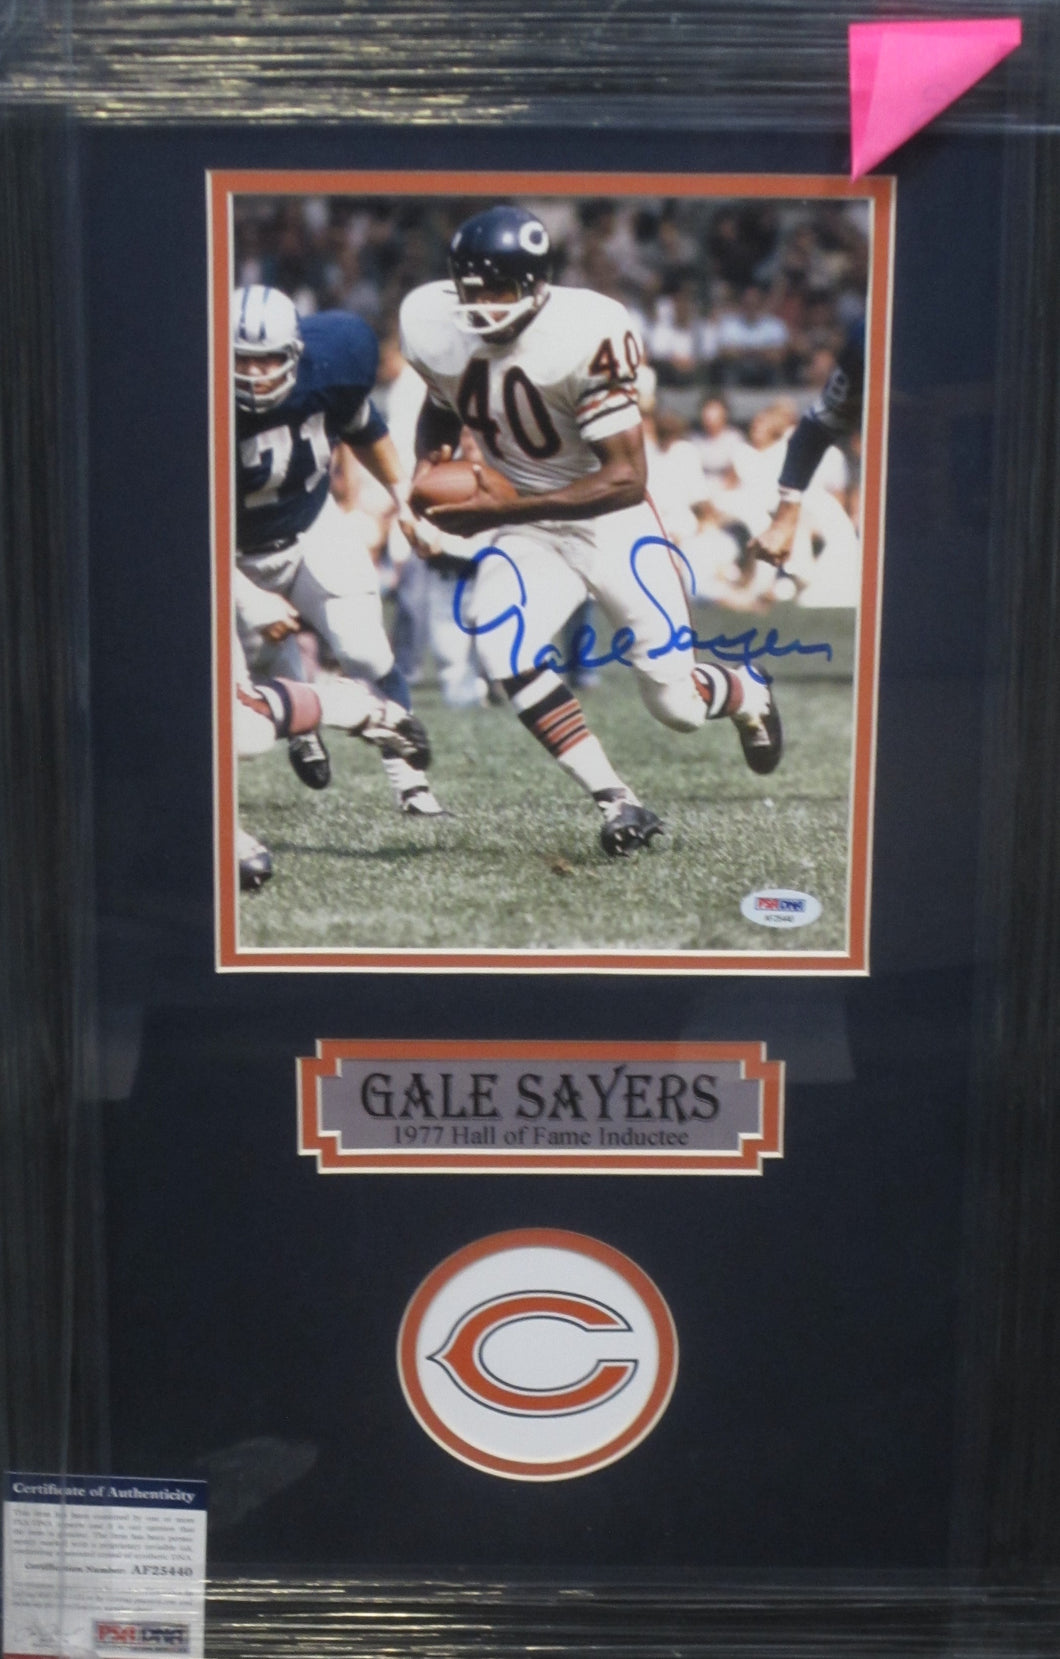 Chicago Bears Gale Sayers Signed 8x10 Photo Framed & Matted with PSA COA